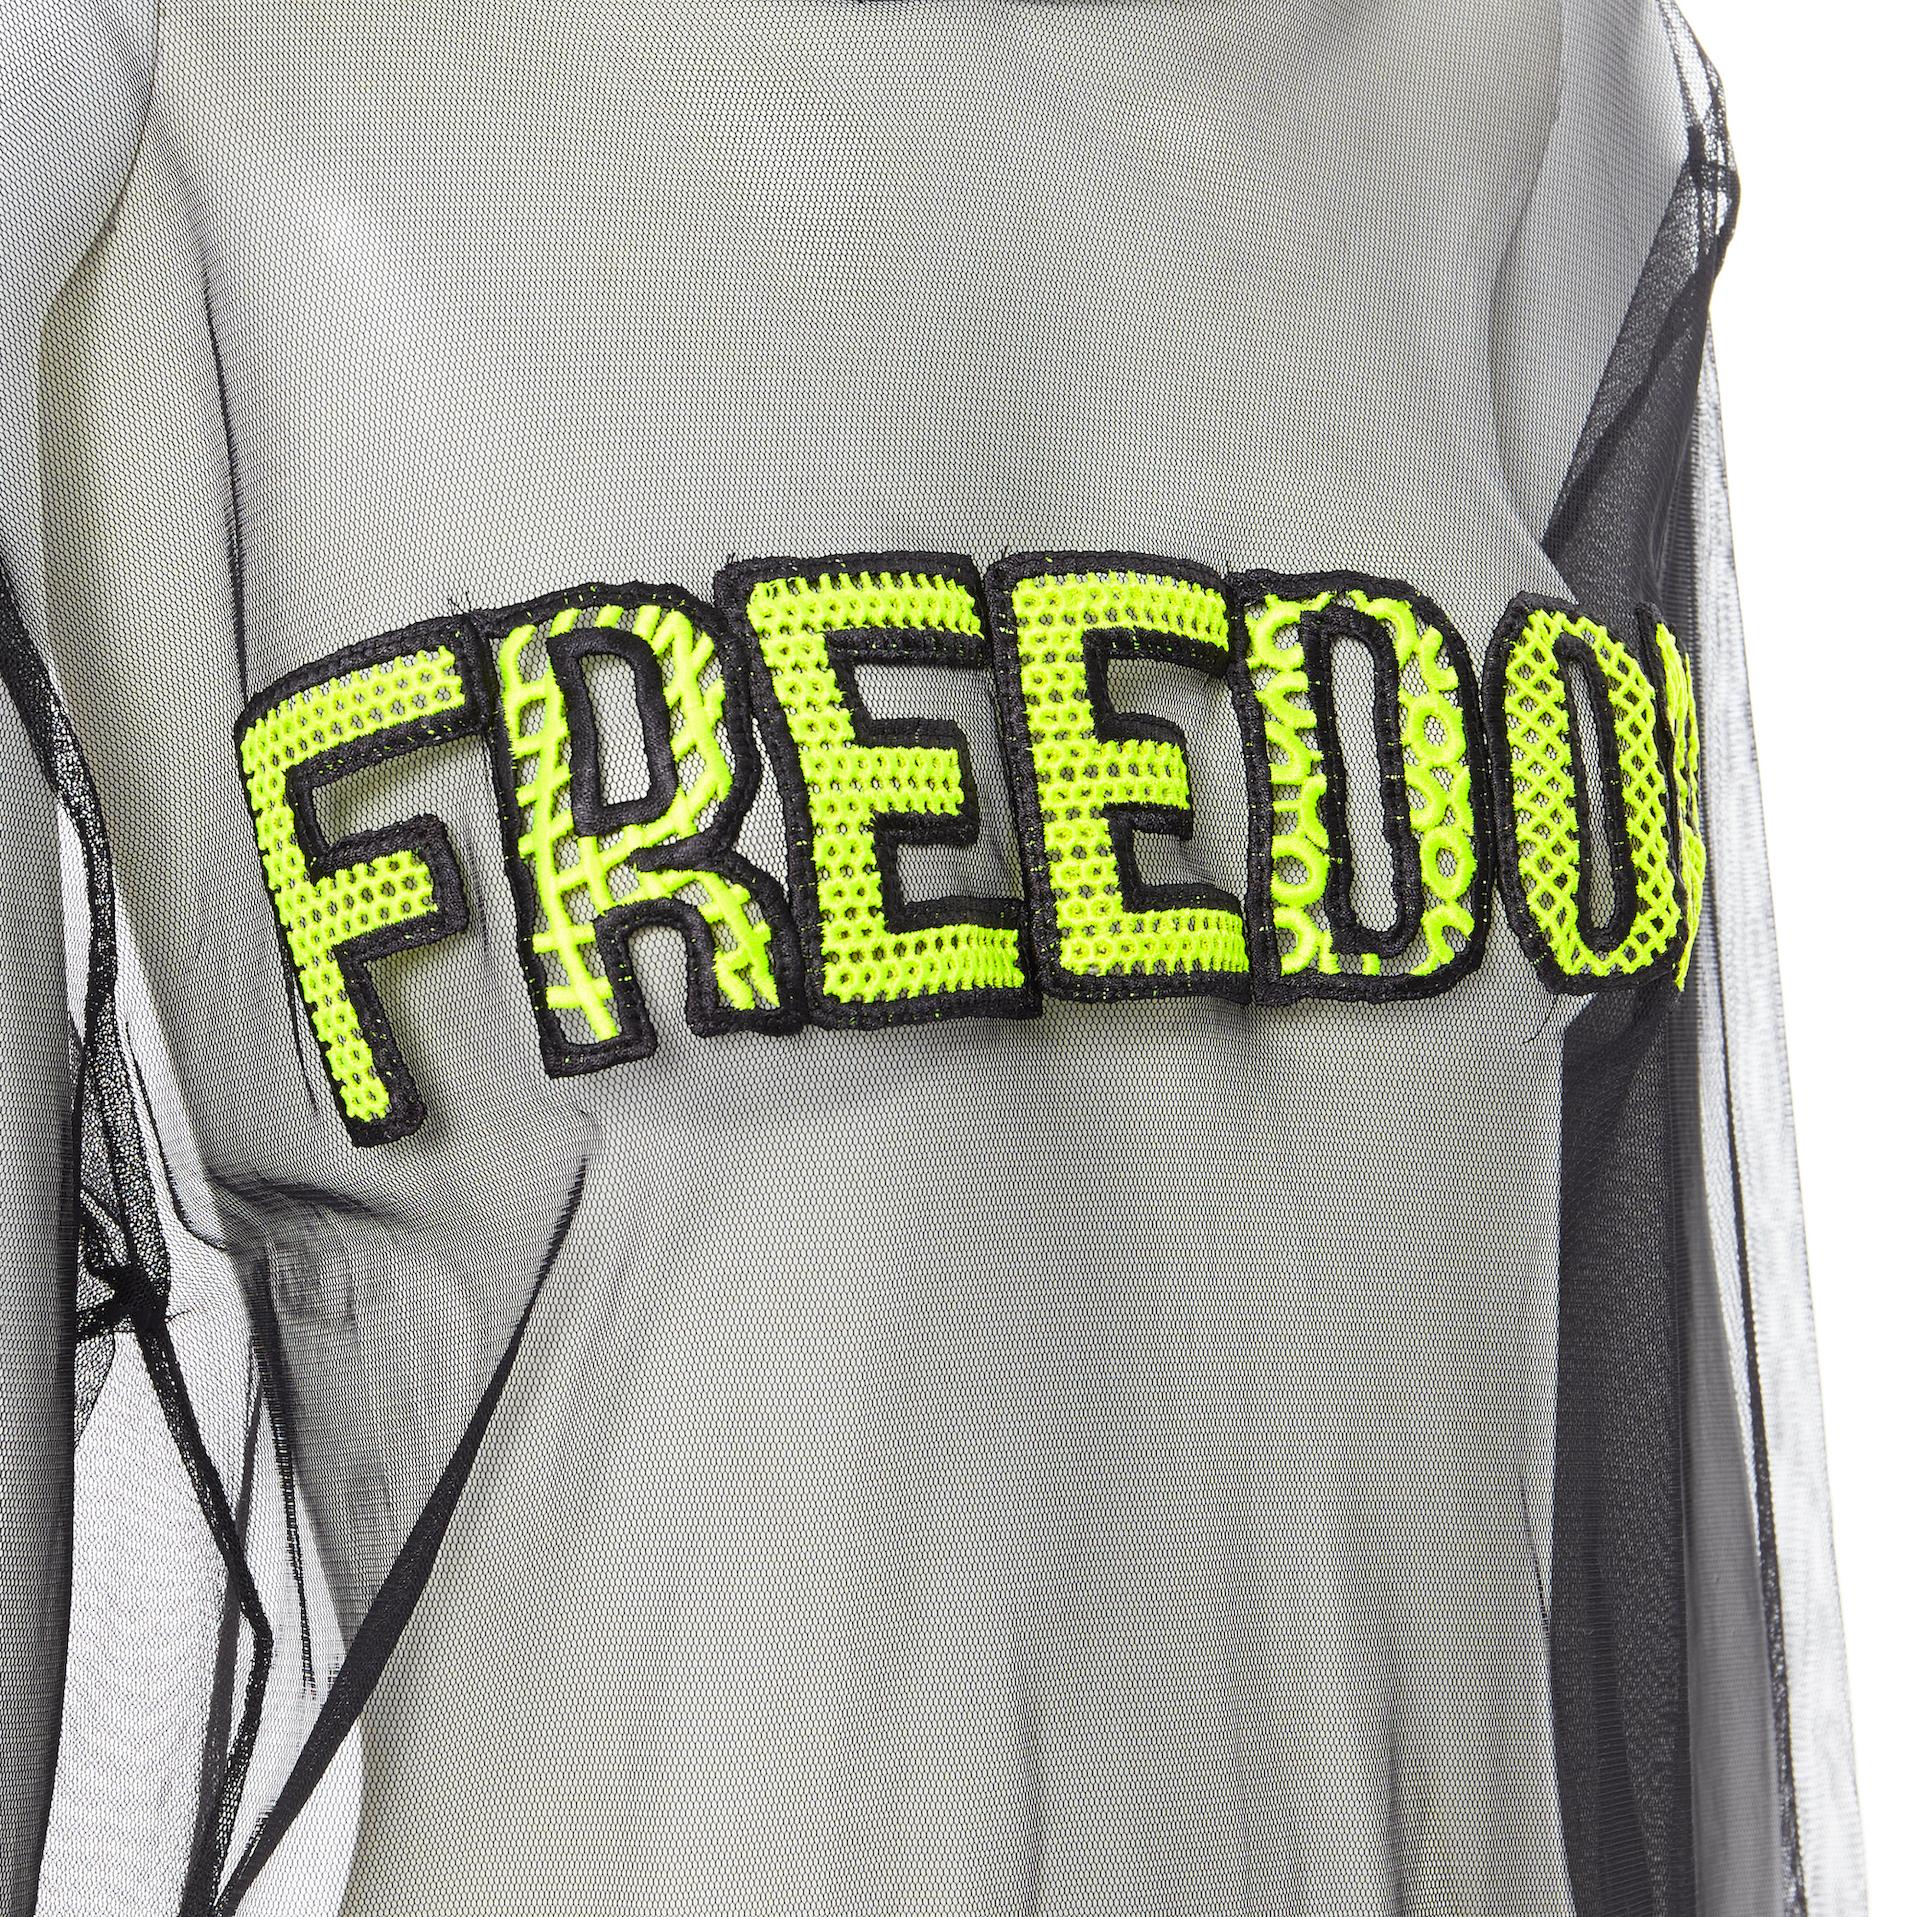 MSGM Freedom neon yellow patch black sheer hooded pullover top Fr38 S 
Reference: WEYN/A00369 
Brand: MSGM 
Material: Polyamide 
Color: Black 
Pattern: Solid 
Extra Detail: Pullover. Hooded. Freedom patch at front. 
Made in: Italy 

CONDITION: